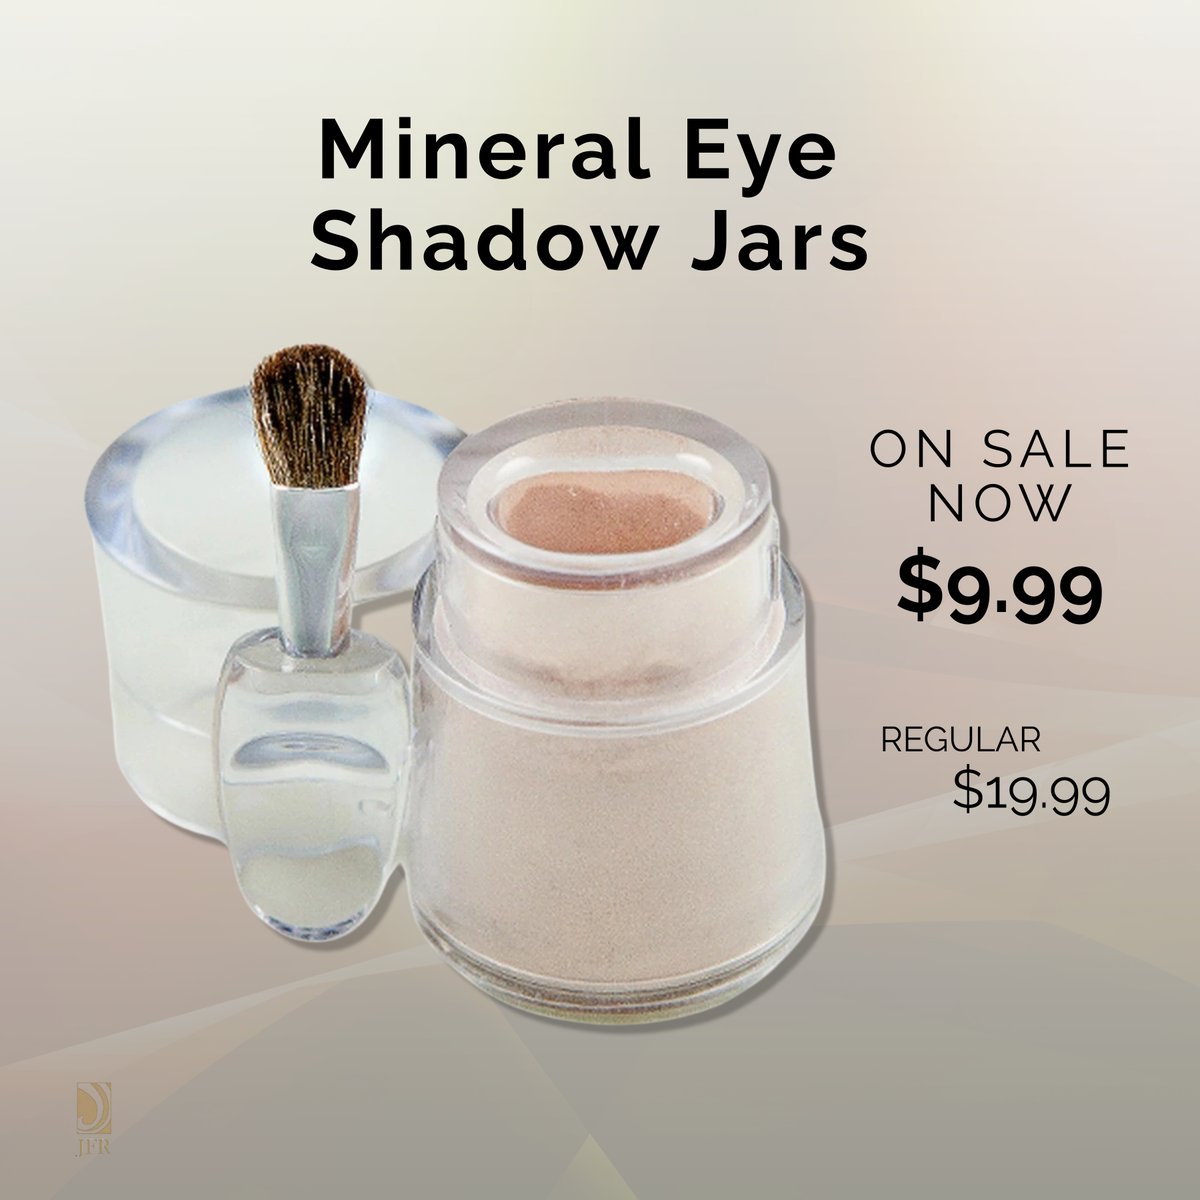 Mineral Eye Shadow Jars - BOGO!
Make a statement with these exclusive mineral shades that are a perfect color compliment for redheads!

justforredheads.com/mineral-eye-sh…

#eyeshadow #redhair #beautyproducts #jfr #justforredheadsofficial #ginger